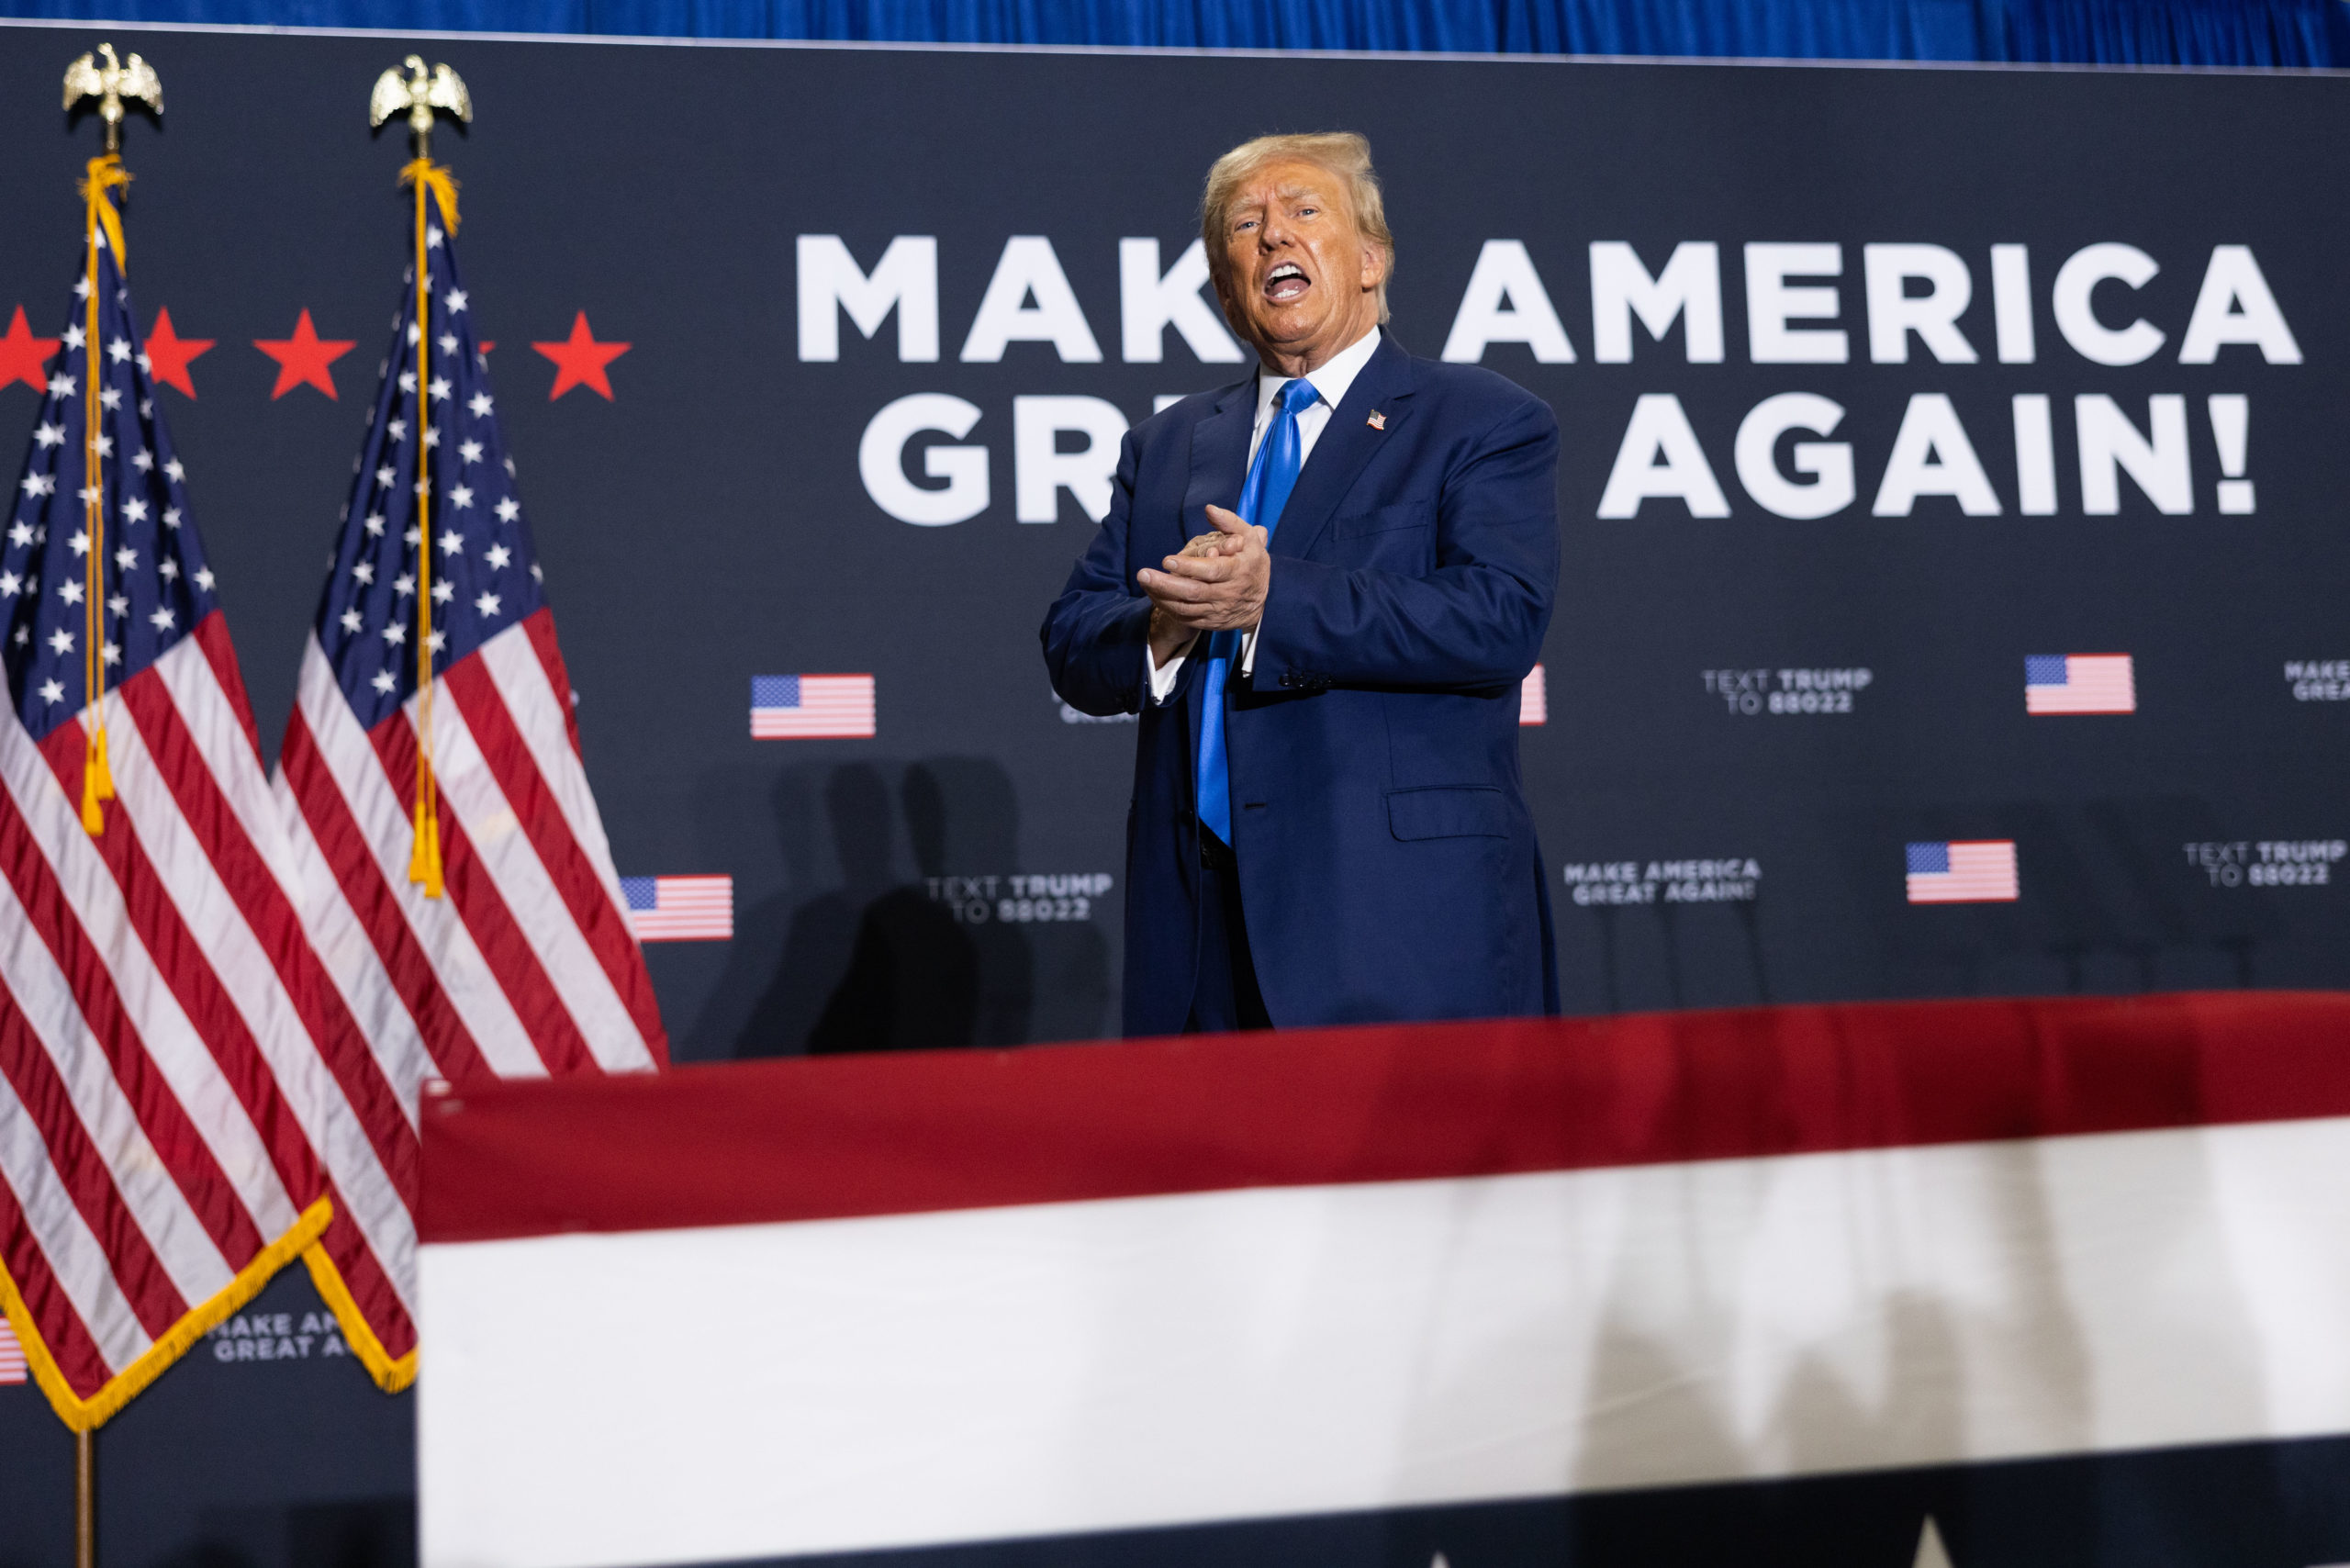 DERRY, NEW HAMPSHIRE - OCTOBER 23: Republican presidential candidate former President Donald Trump on stage after delivering remarks during a campaign event on October 23, 2023 in Derry, New Hampshire. Trump officially filed for the first-in-the-nation primary on Monday at the New Hampshire State House. (Photo by Scott Eisen/Getty Images)